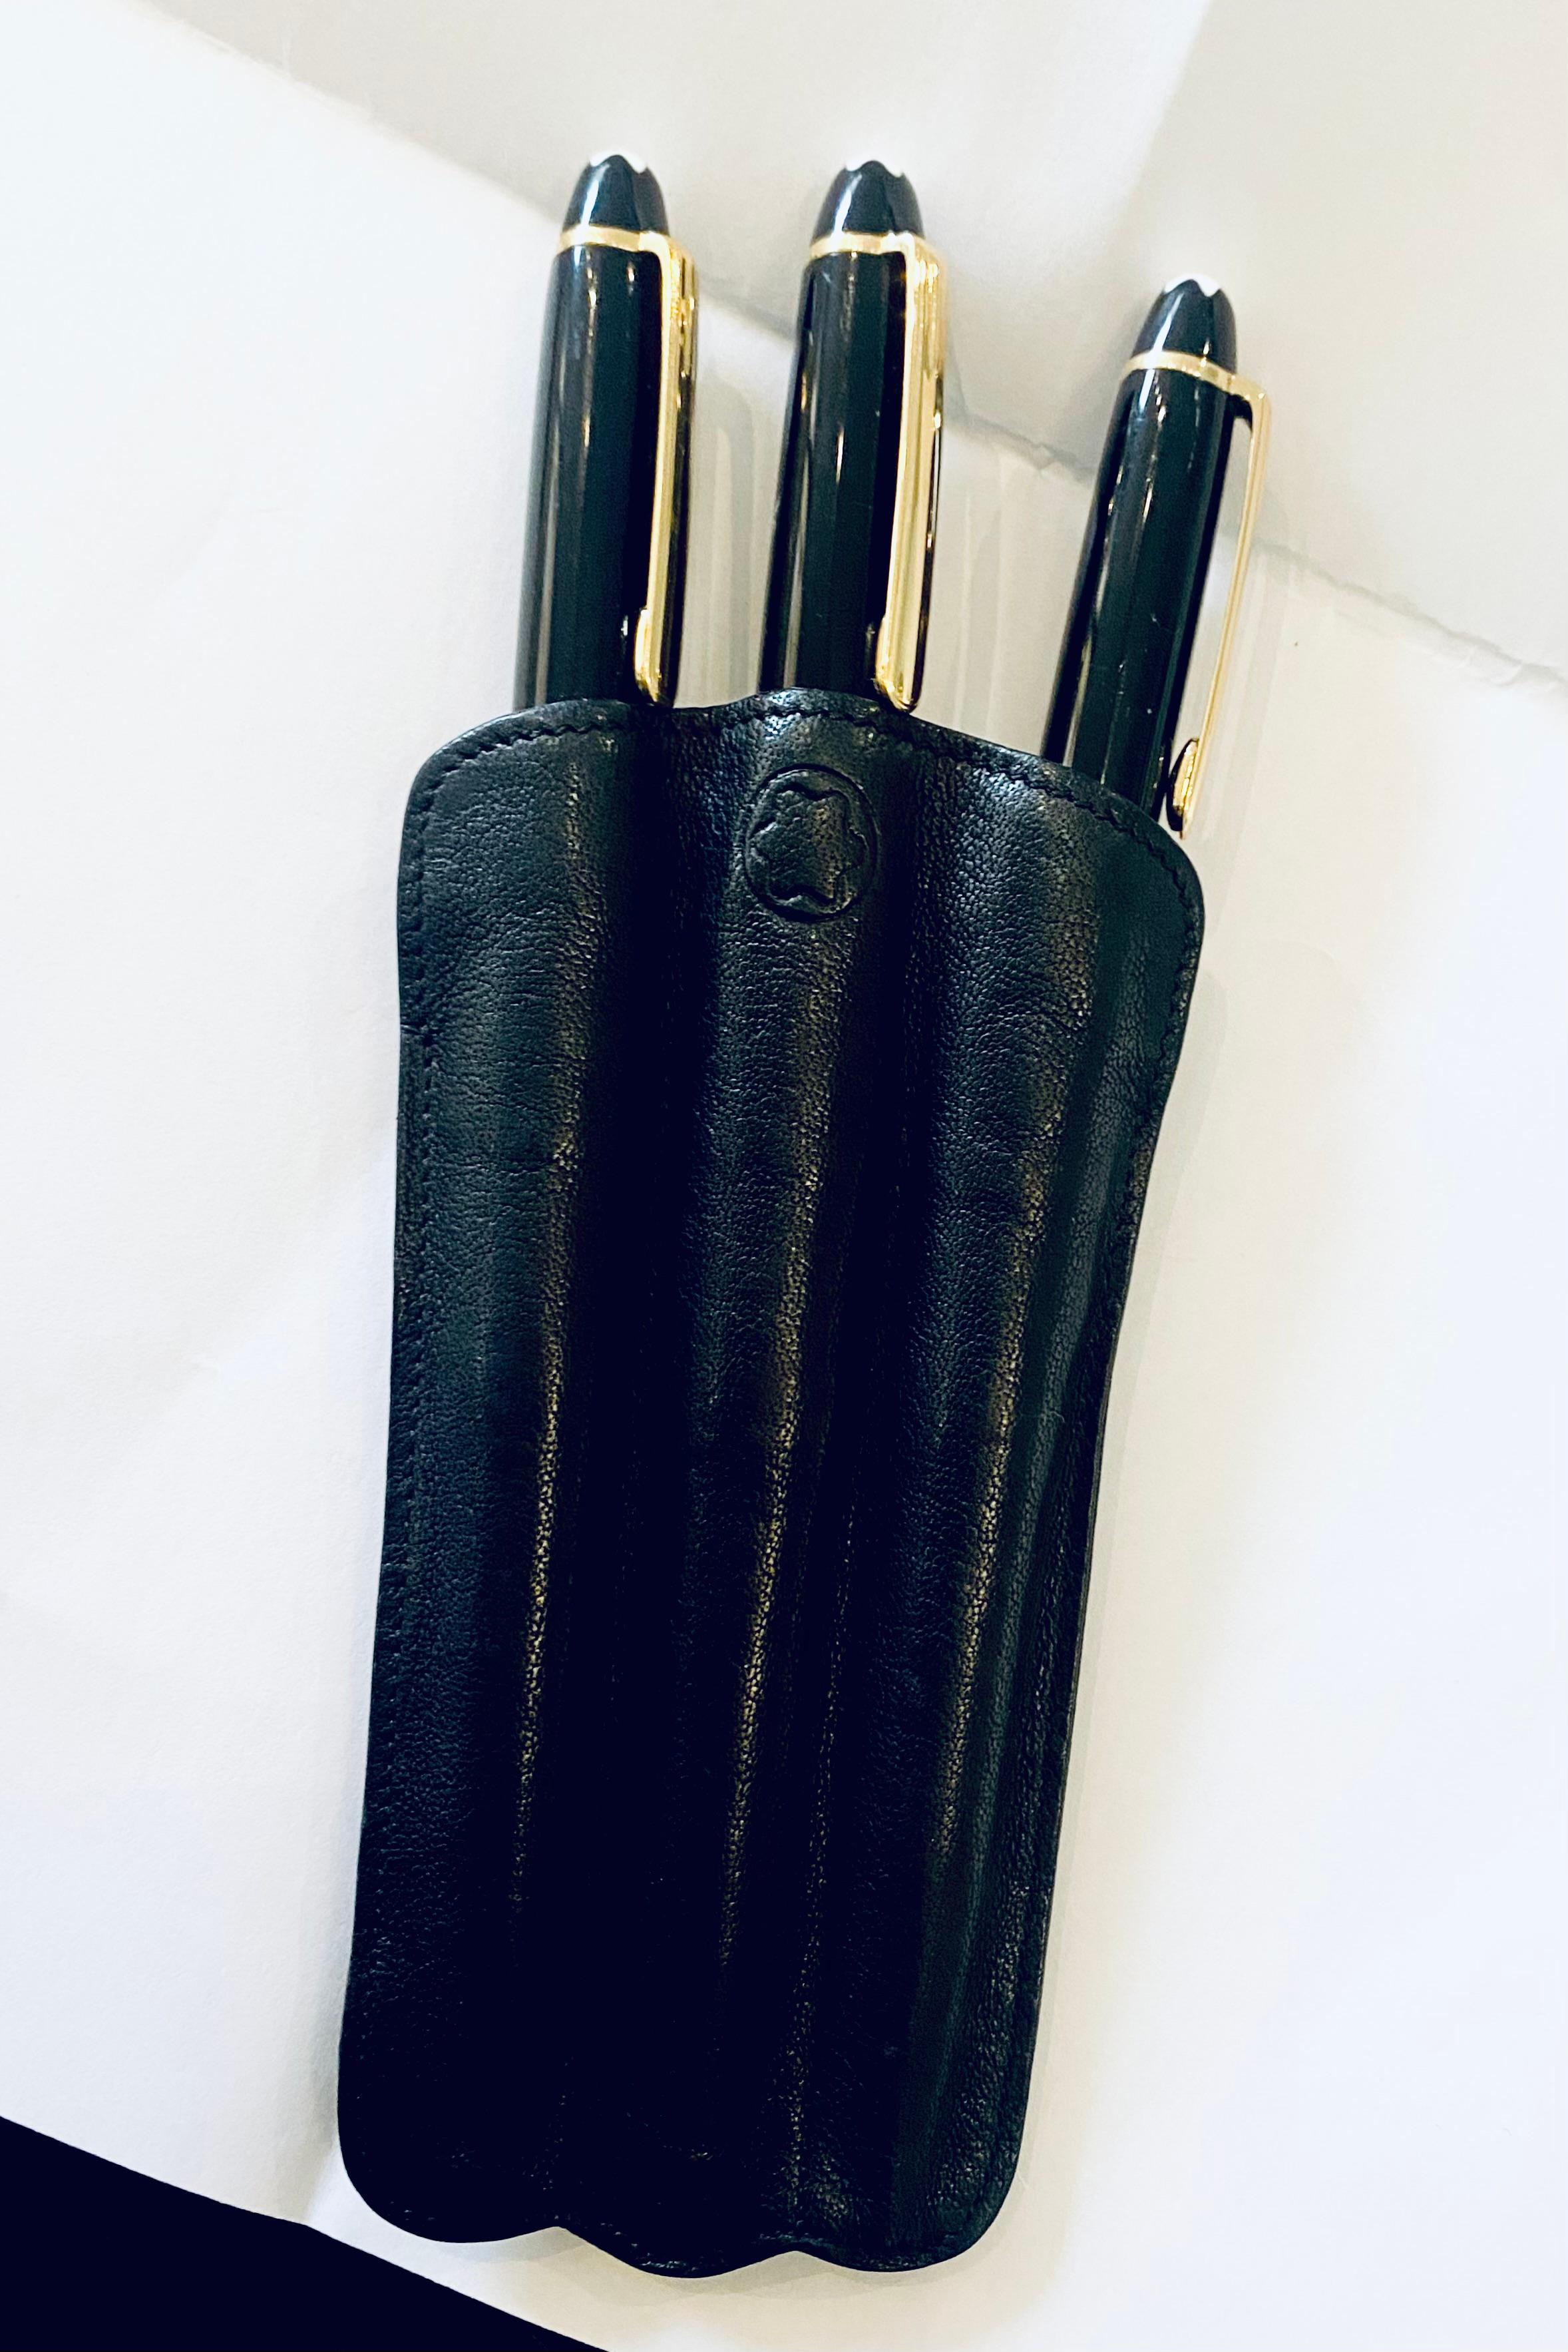 Montblanc Meisterstück Small Size 3 Piece Pen Set In Good Condition For Sale In London, GB